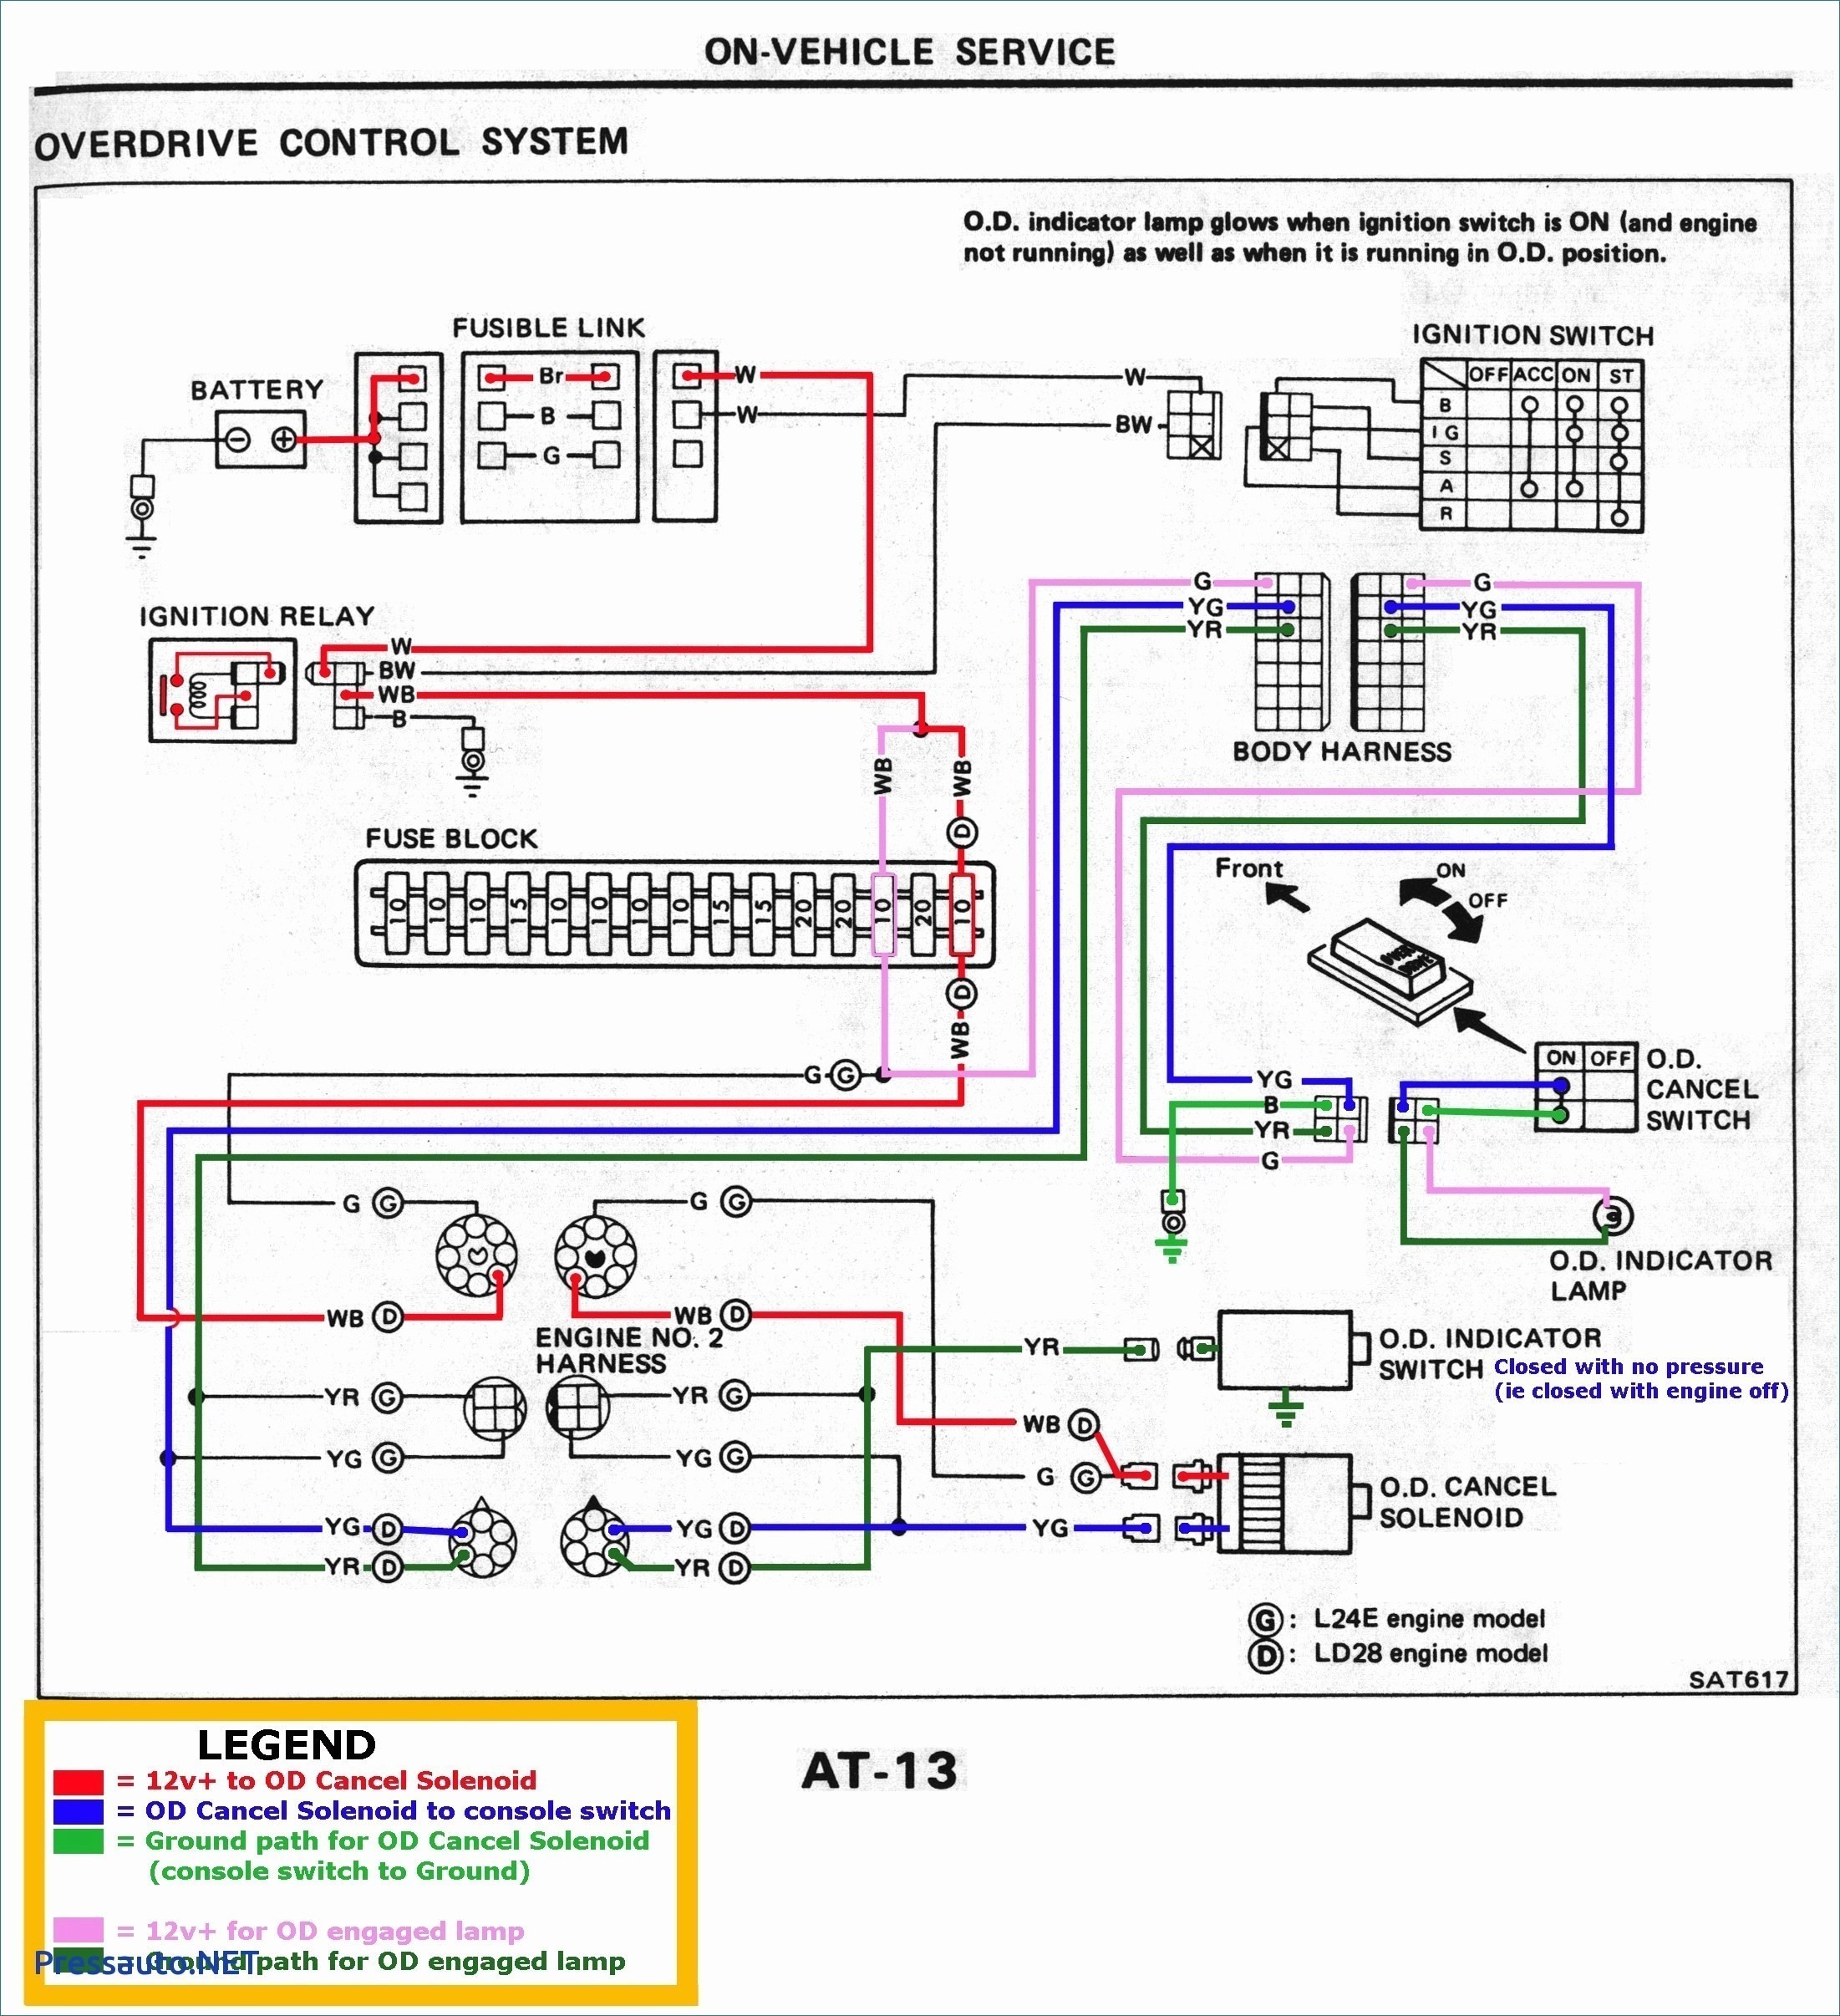 Wiring Diagram For A Gfci Circuit Refrence Wiring Diagrams For A 4 Way Dimmer Switch Dimmer Switch To Gfi Wiring Diagram